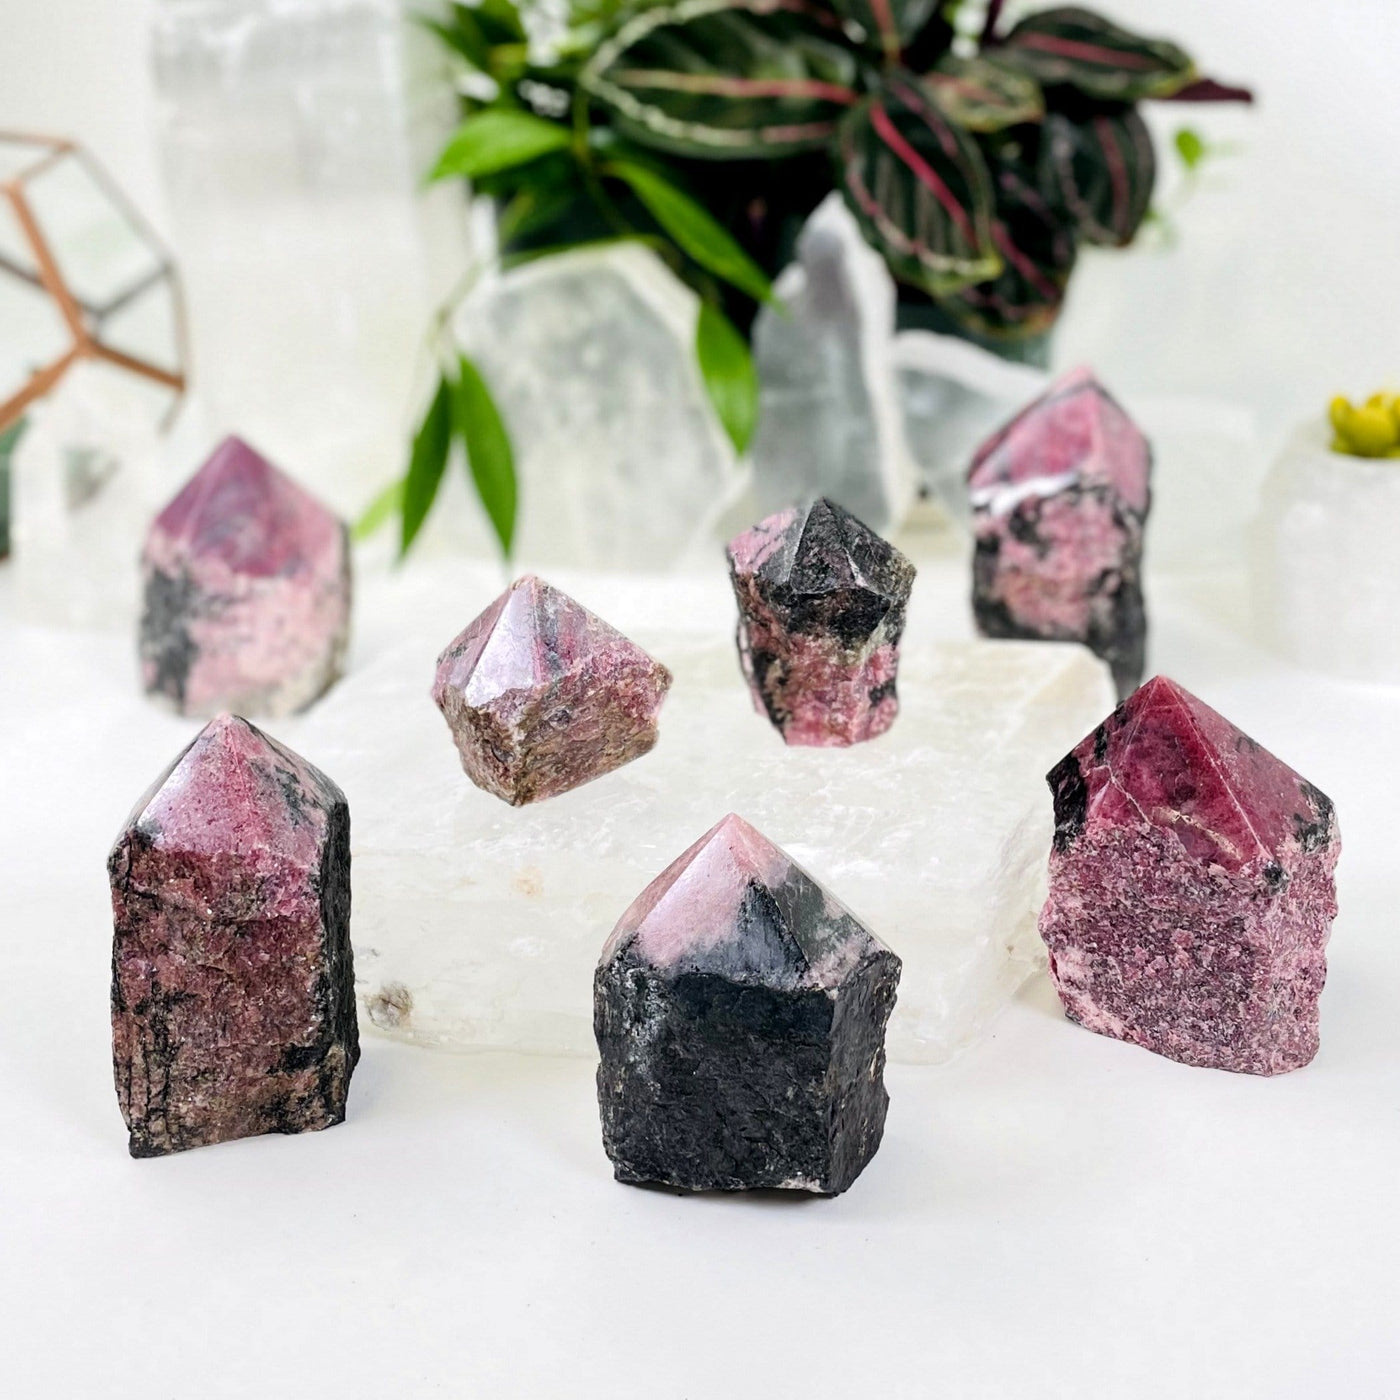 5 Rhodonite Points displayed on a selenite slab with other crystals and decorations blurred in the background